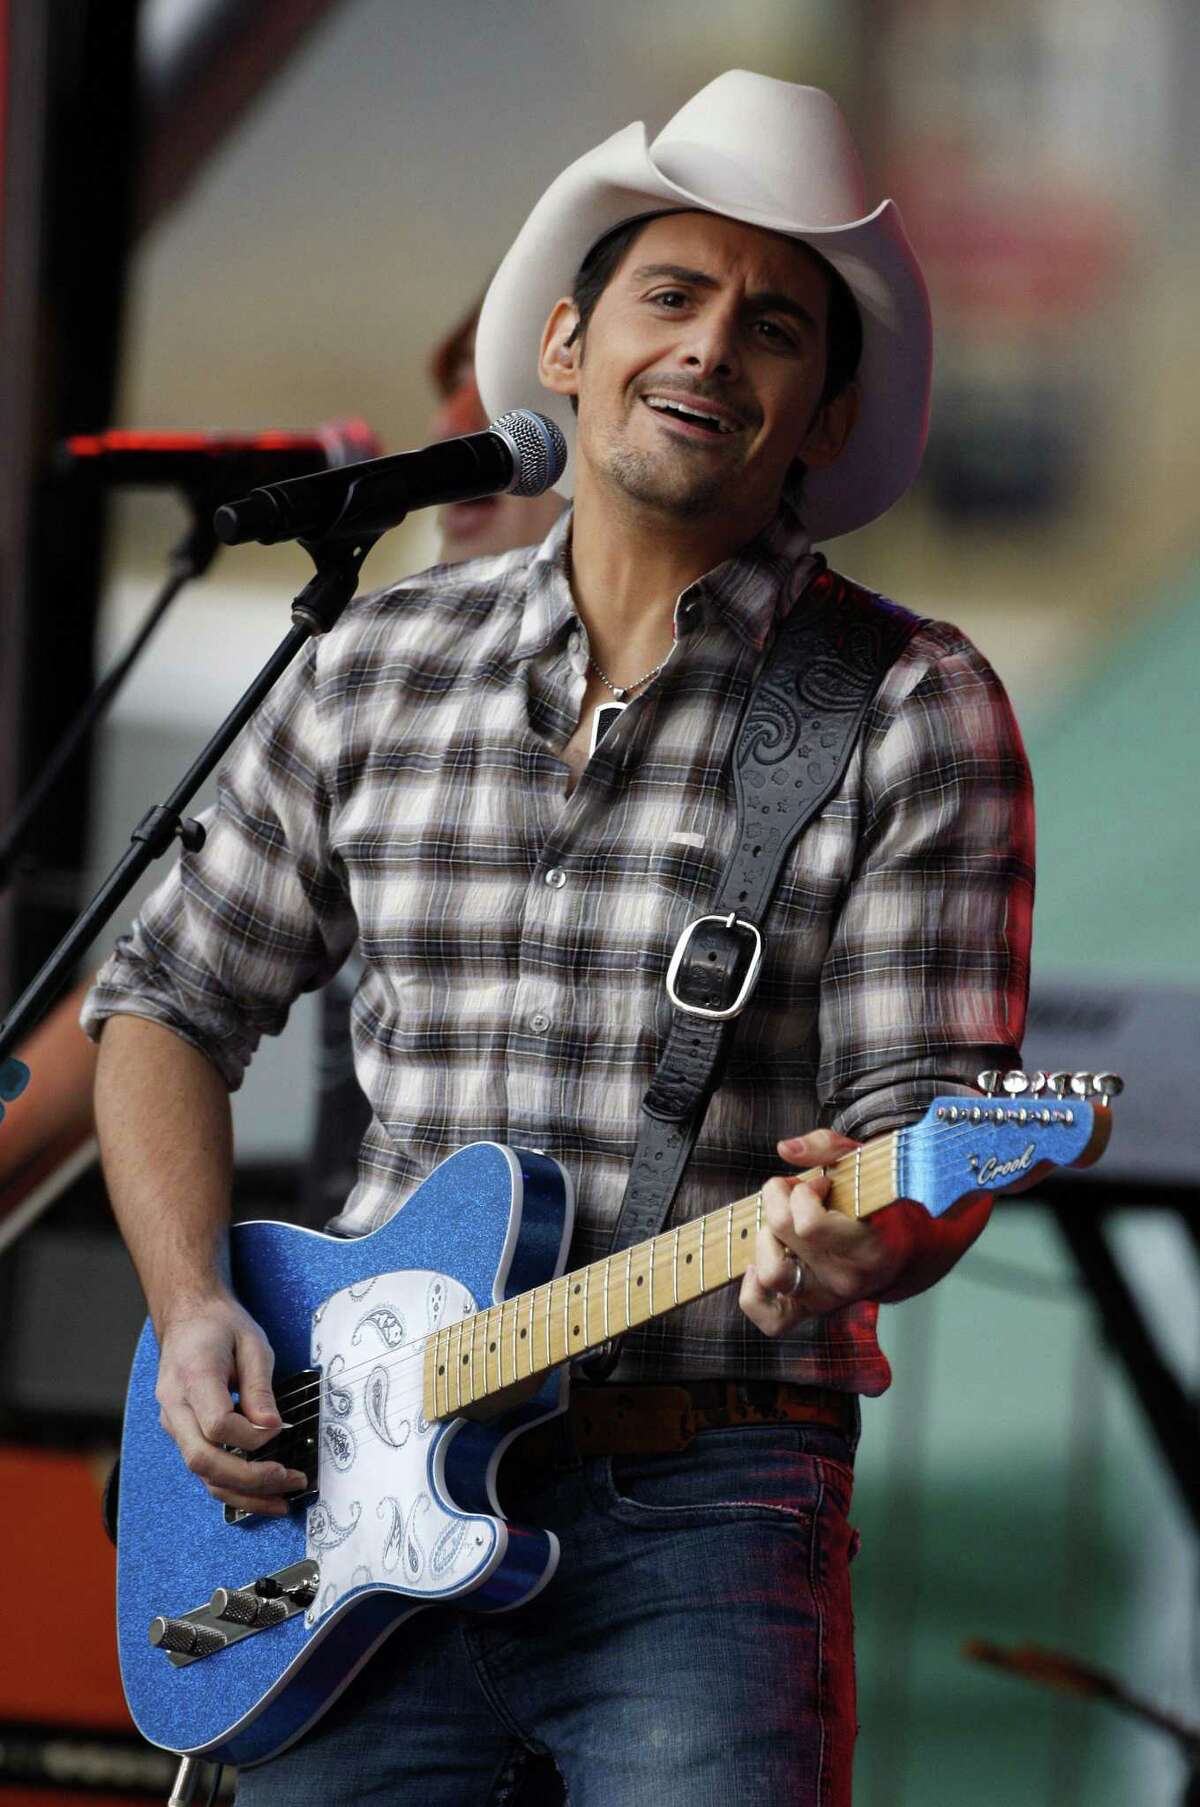 Brad Paisley: The country star with the lethal guitar and disarming wit is always worth the trip to the AT&T Center. Paisley has a deep catalog of hits, including “I’m Gonna Miss Her,” “Waitin’ on a Woman,” “Ticks” and “Then.” His latest single, “Bucked Off,” name-checks both San Antonio and George Strait. 7:30 p.m. Friday. San Antonio Rodeo, AT&T Center. Sold out. attcenter.com — Jim Kiest